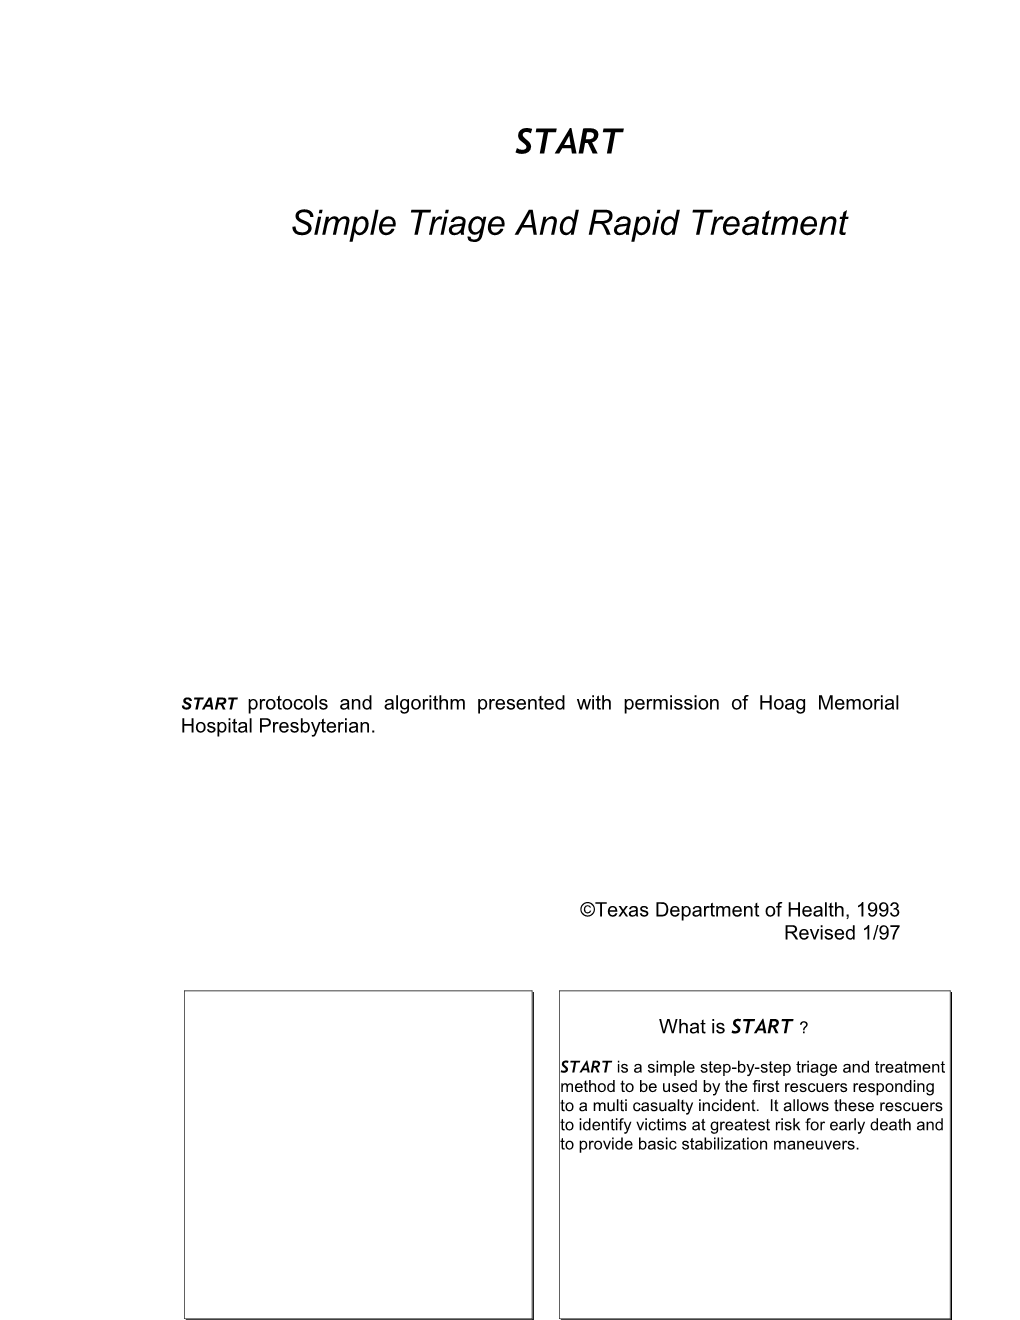 Simple Triage and Rapid Treatment